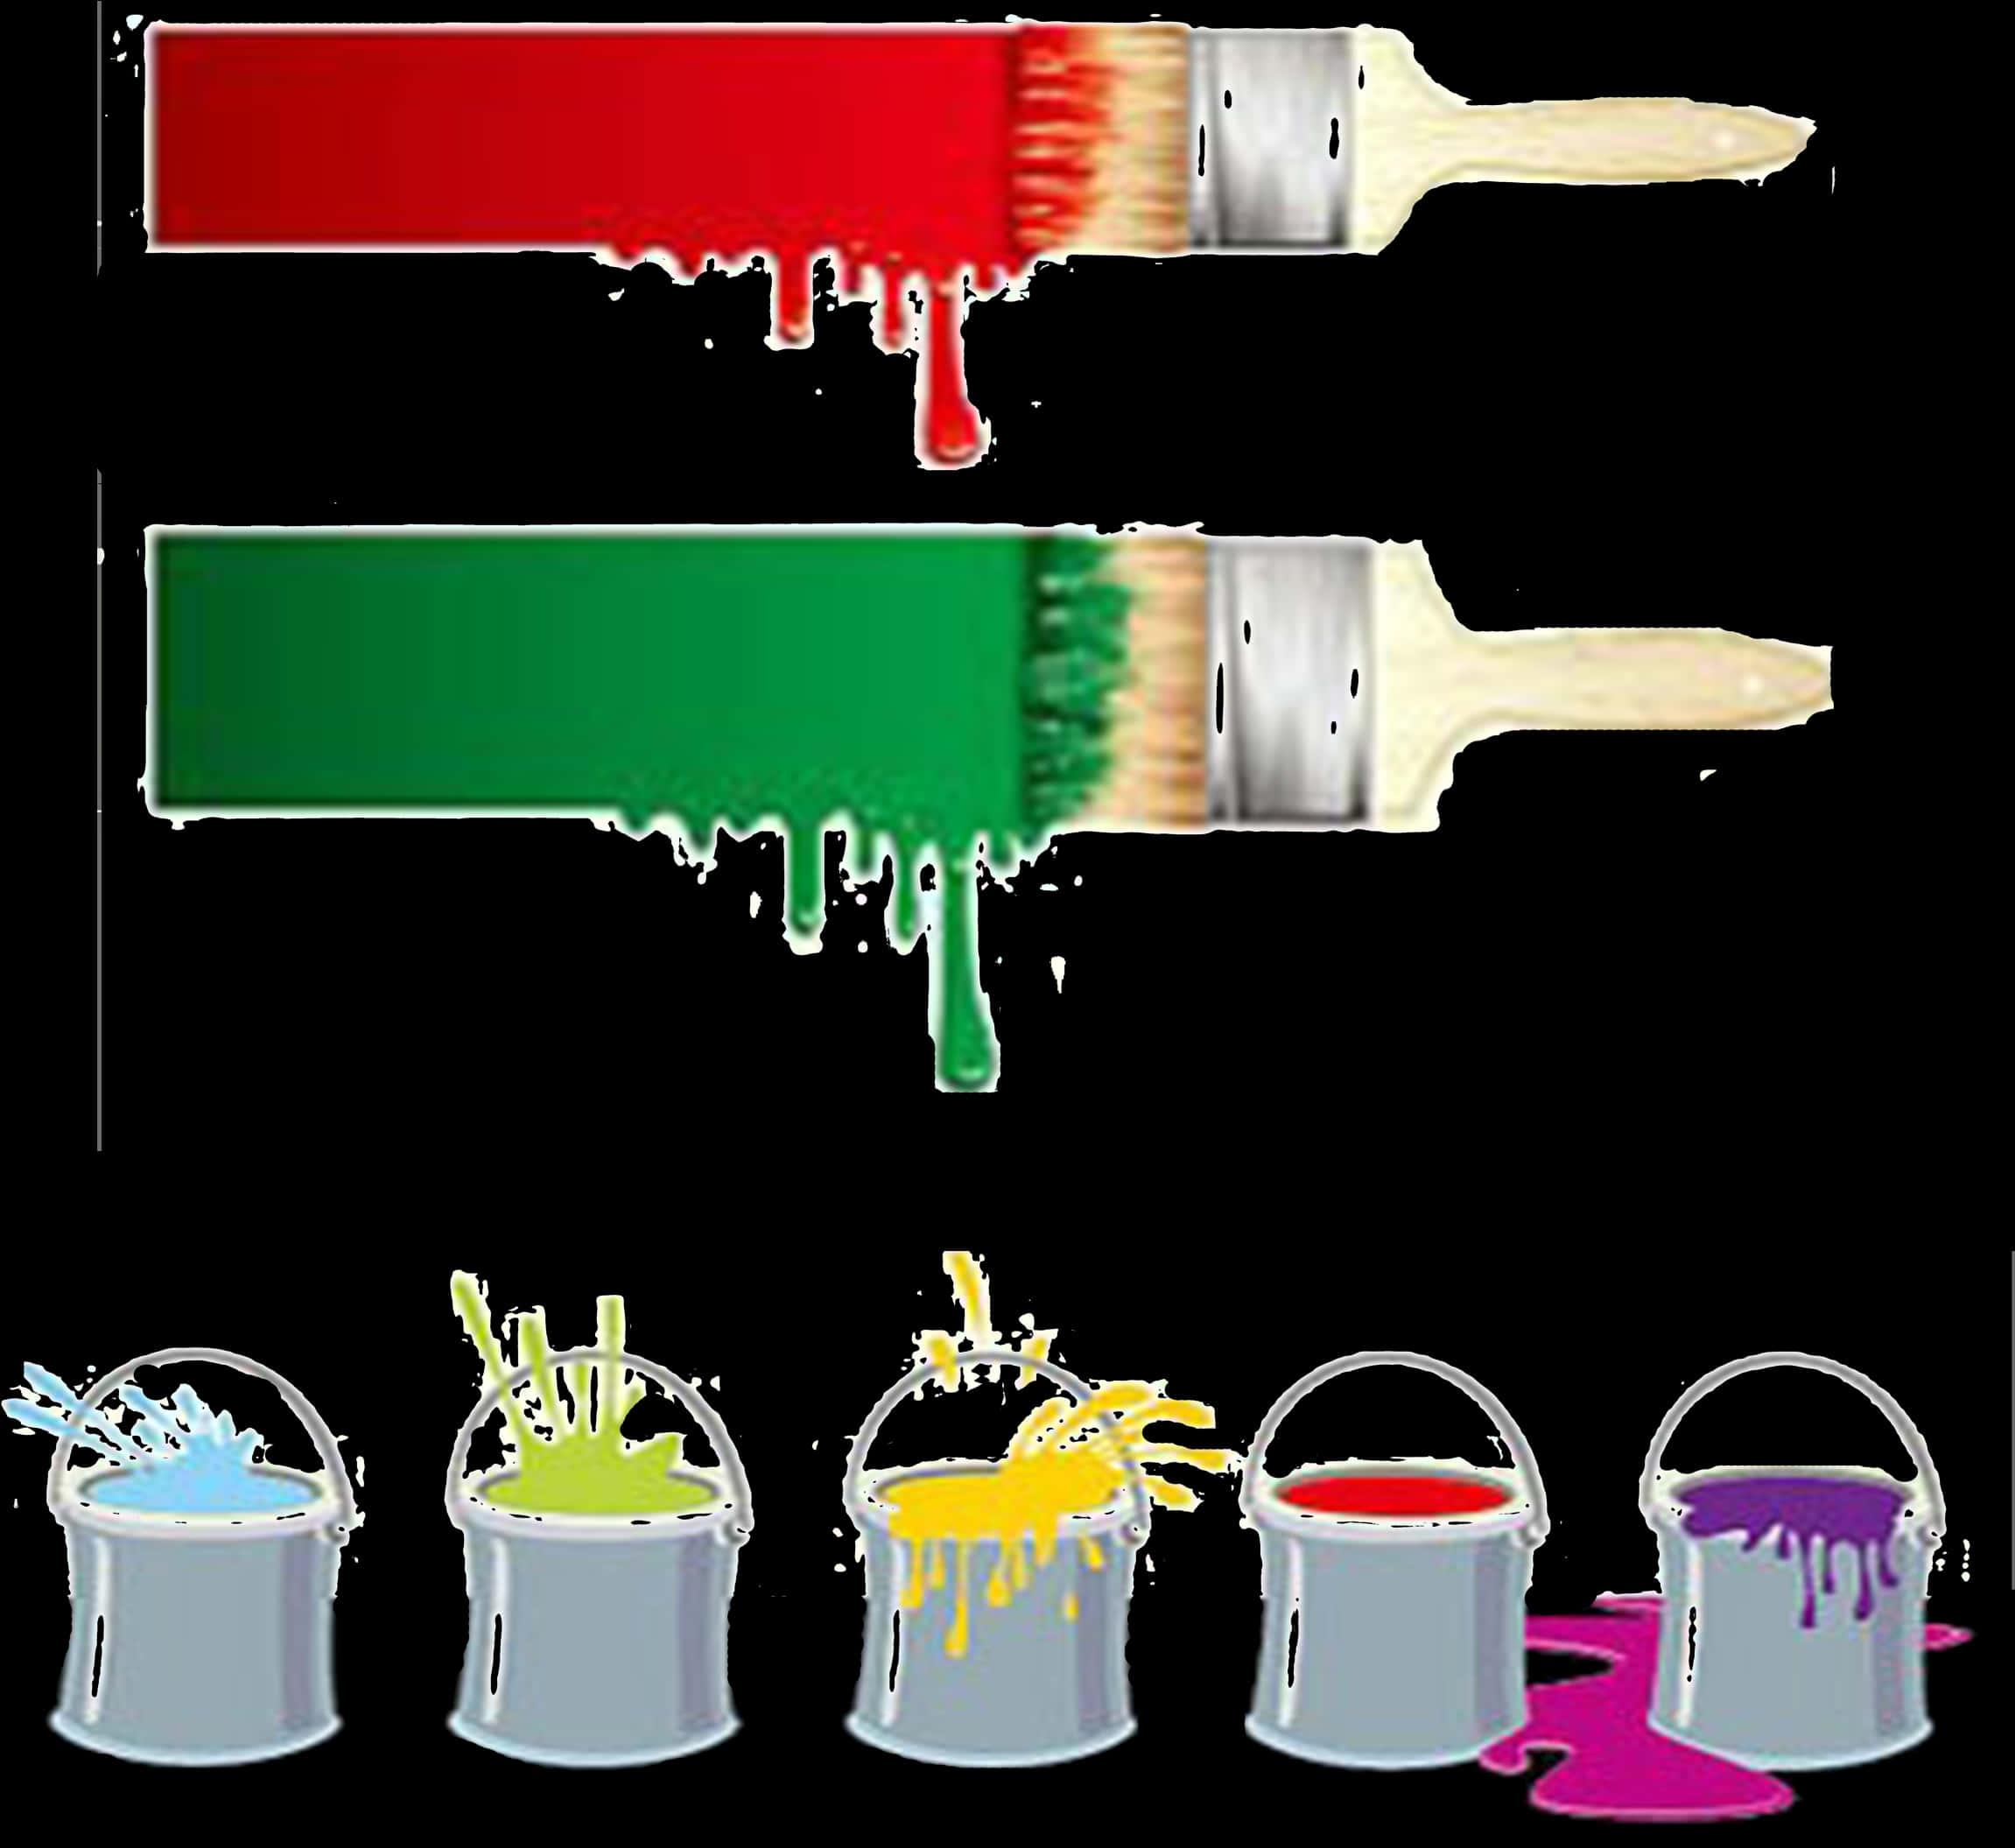 Paint Brushes With Paint Dripping From Buckets